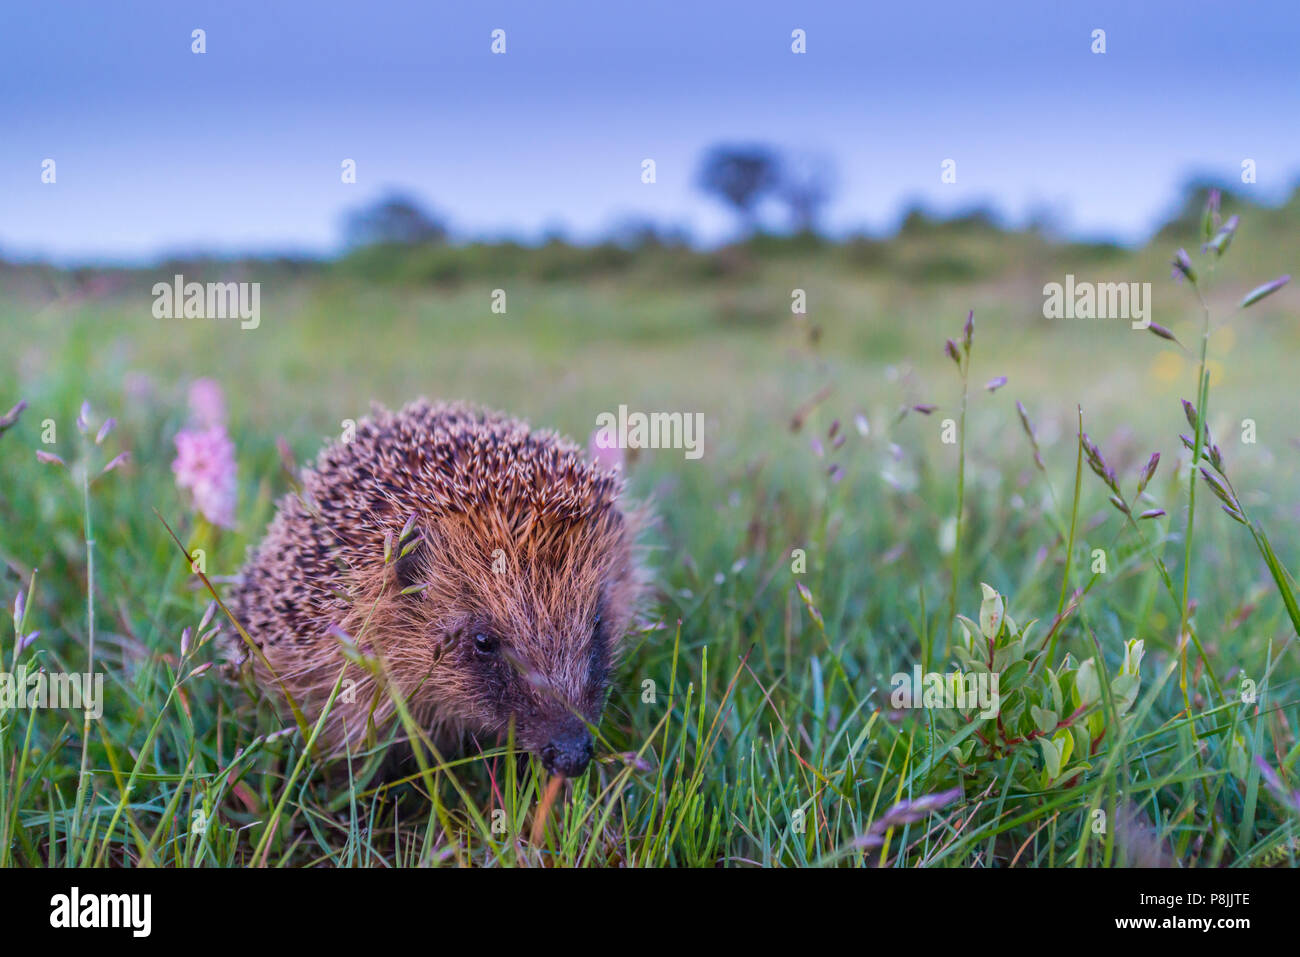 european hedgehog in a wet dune valley on an evening in spring Stock Photo